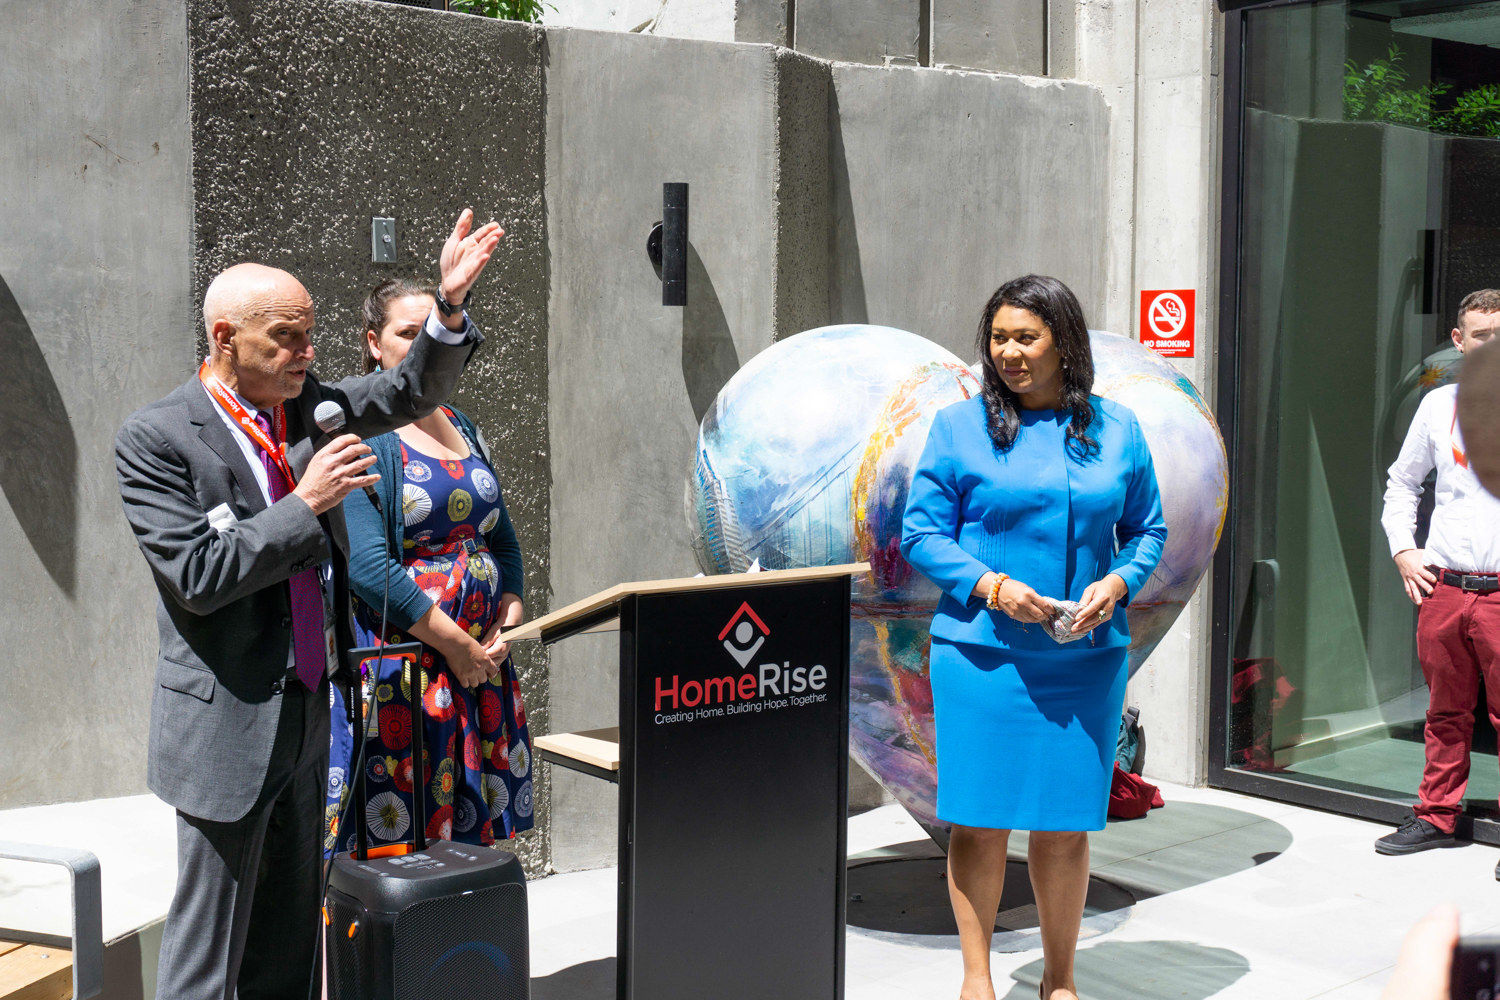 Mayor London Breed and HomeRise CEO Rick Aubry in the 53 Colton Street courtyard, image by author